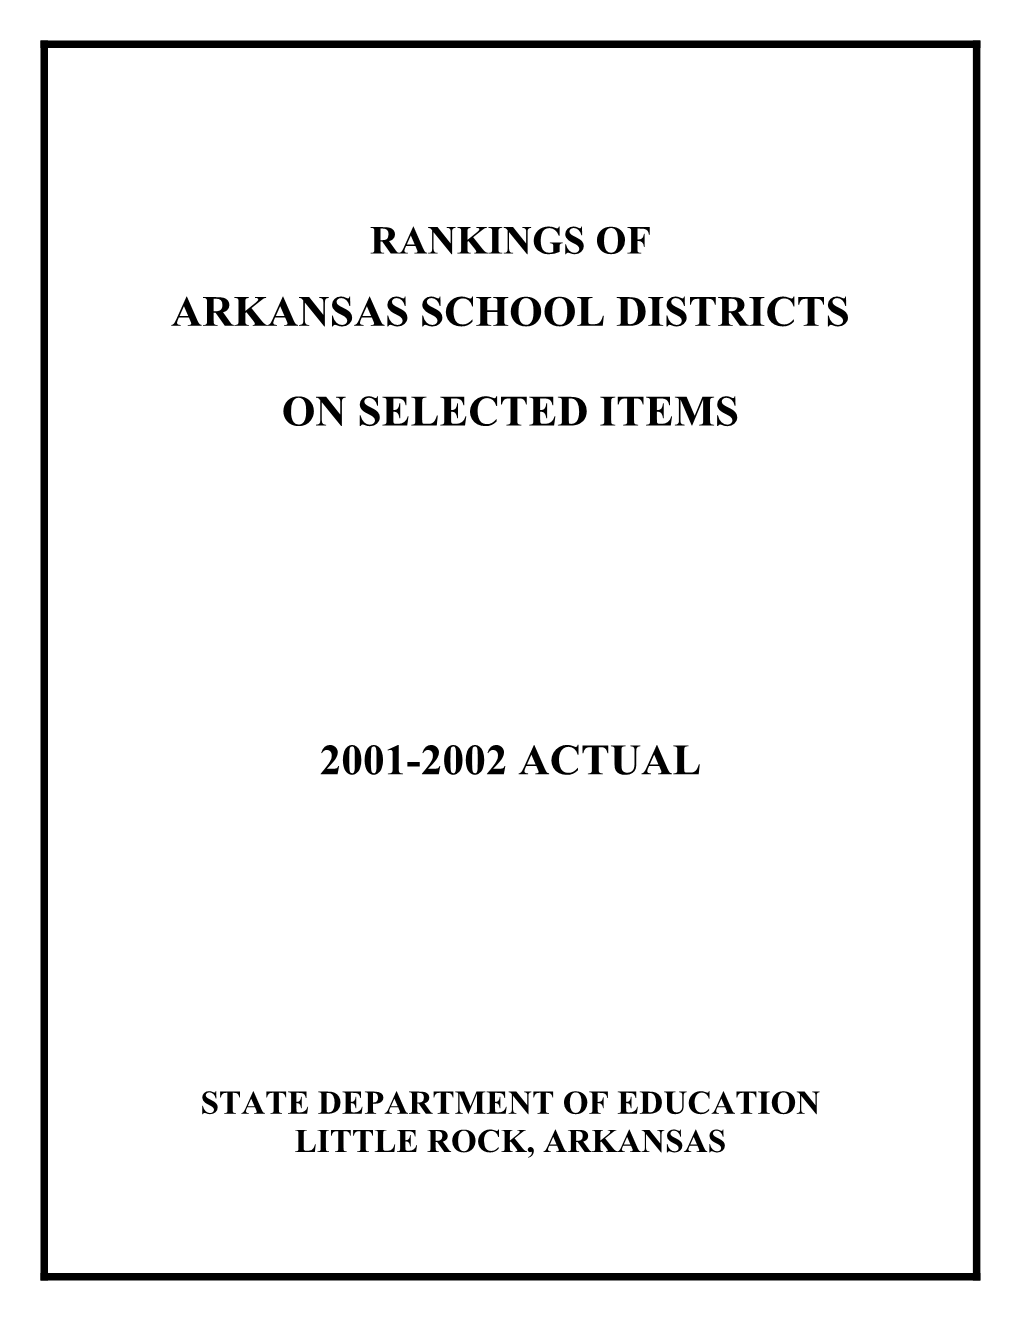 Arkansas School Districts on Selected Items 2001-2002